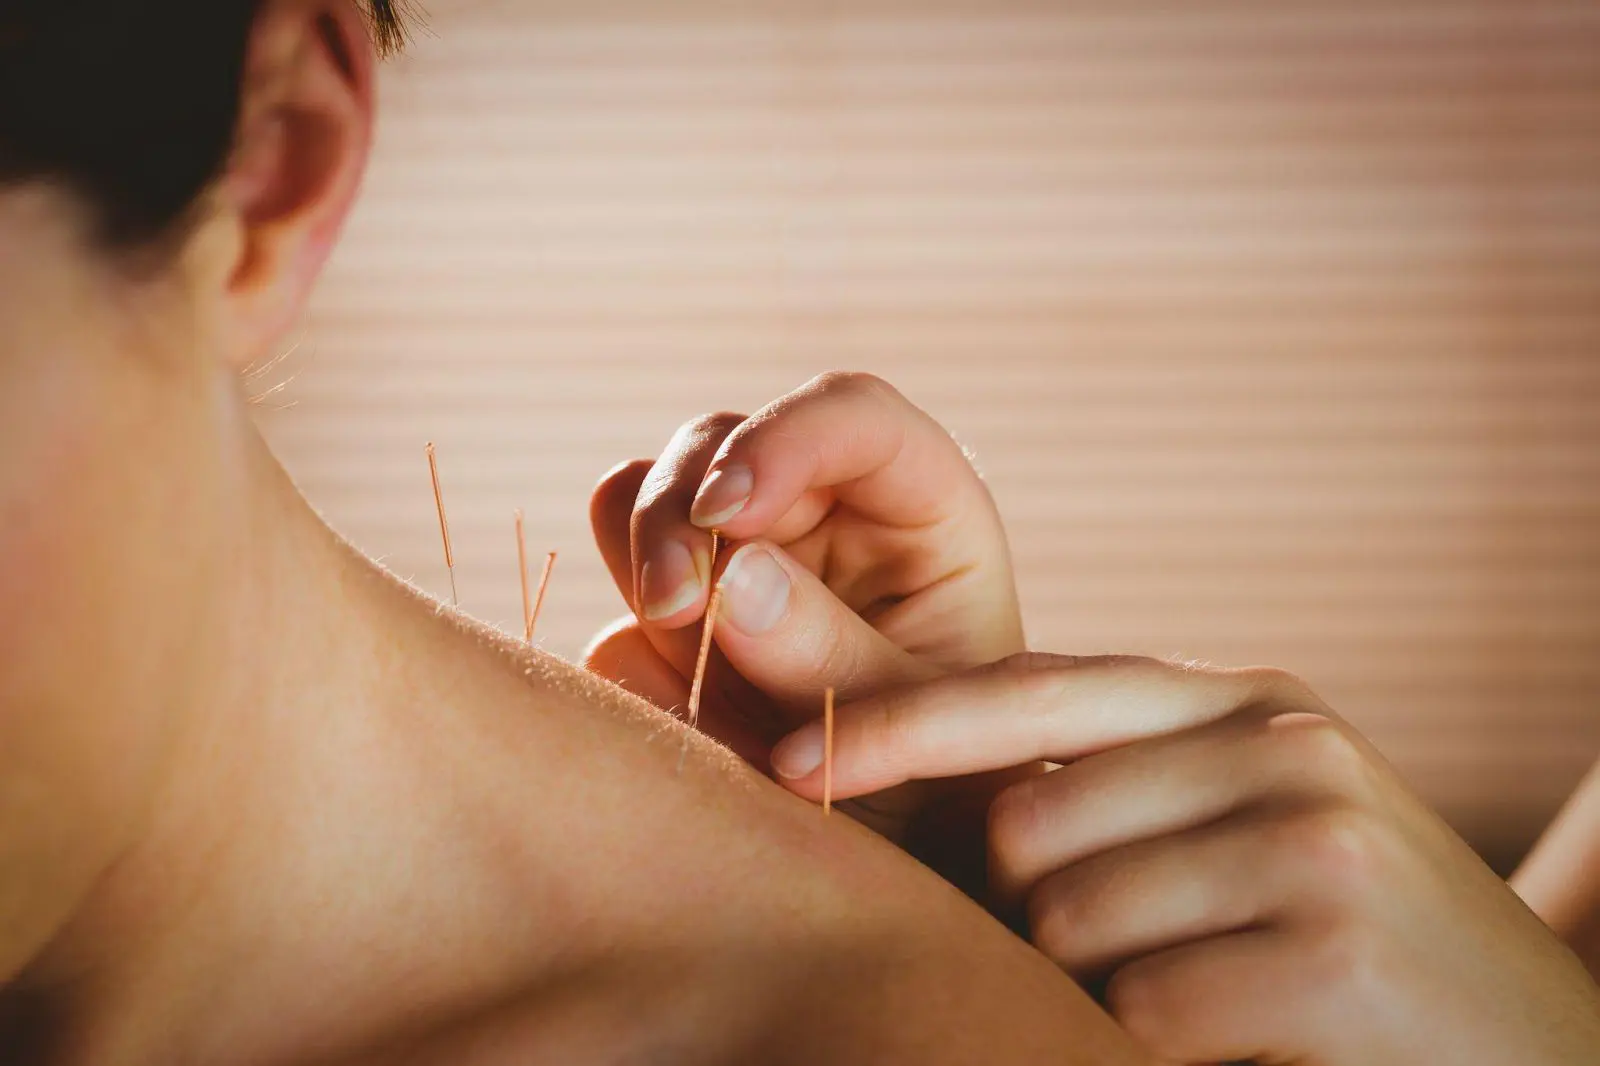 Young woman getting acupuncture on her shoulder.